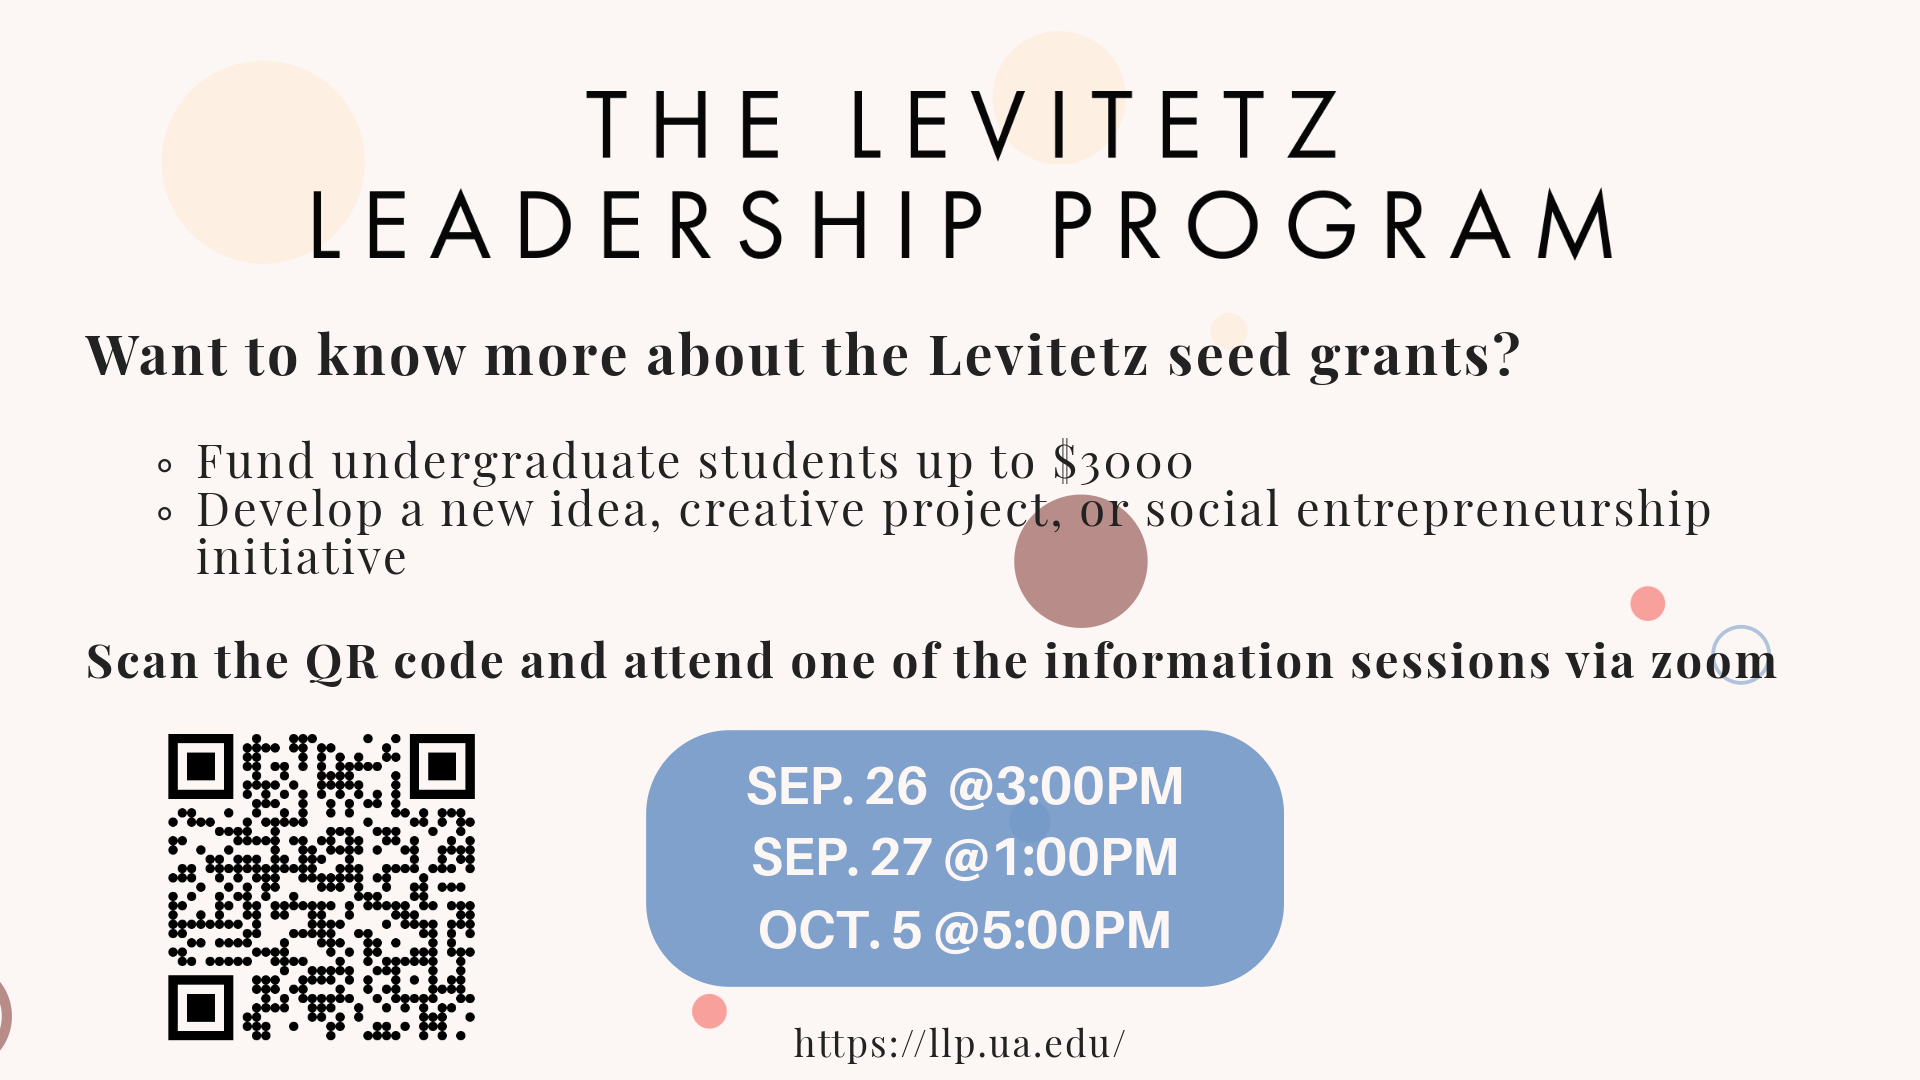 Want to know more about the Levitetz seed grants which fund undergraduate students up to $3000 to develop a new idea, creative project, or social entrepreneurship initiative? Attend one of the information sessions via Zoom! September 26 @ 3:00pm - https://ua-edu.zoom.us/j/86844312981 September 27 @ 1:00pm - https://ua-edu.zoom.us/j/89154139868 October 5 @ 5:00pm - https://ua-edu.zoom.us/j/85223696815